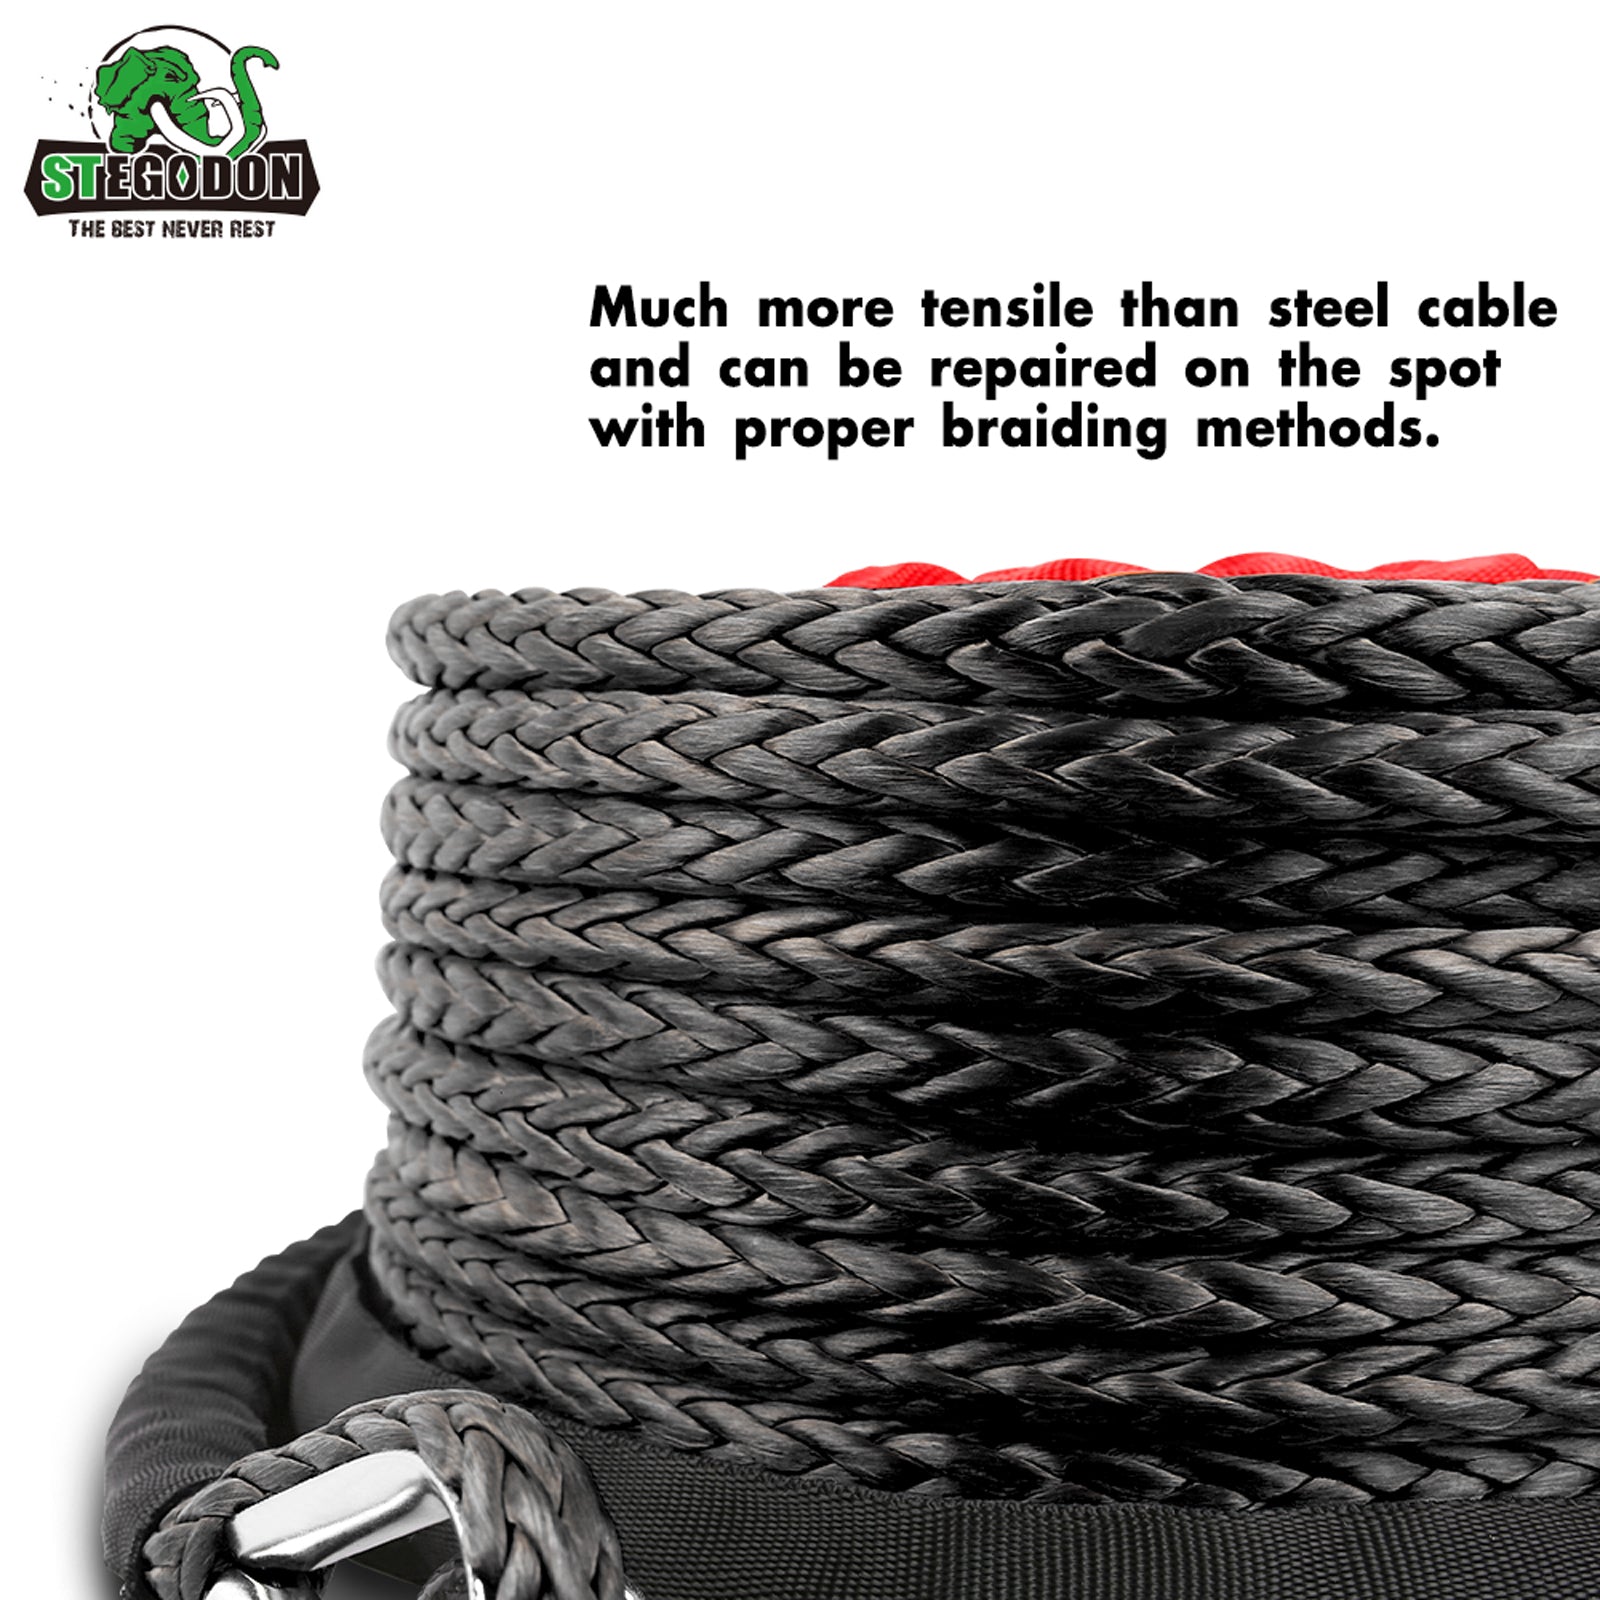 STEGODON 3/8 x 100ft Synthetic Winch Rope 23,809lbs Dyneema Winch Cable Line with Hook and Sleeve Protection Car Tow Recovery Cable for 4WD Off